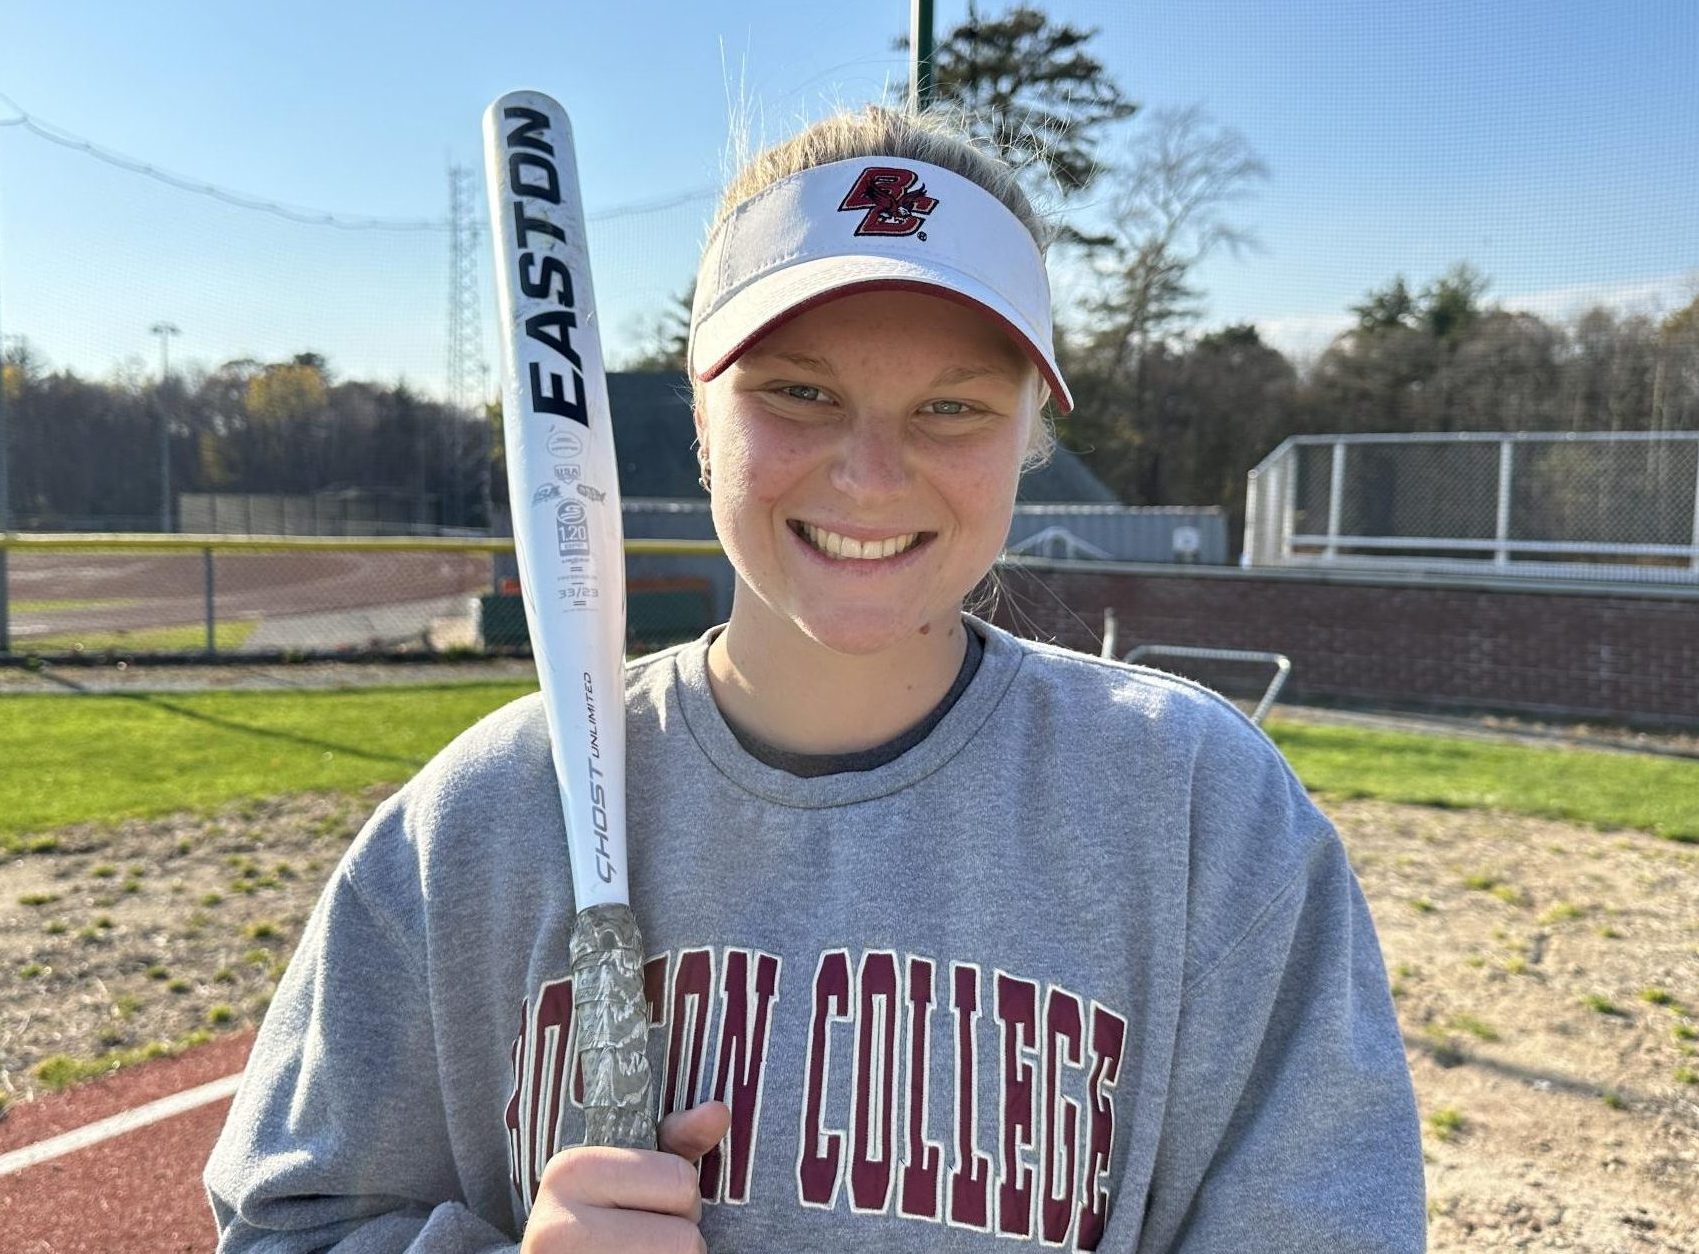 Holly Paharik wears her Boston College softball visor to show that she has verbally committed to the university.